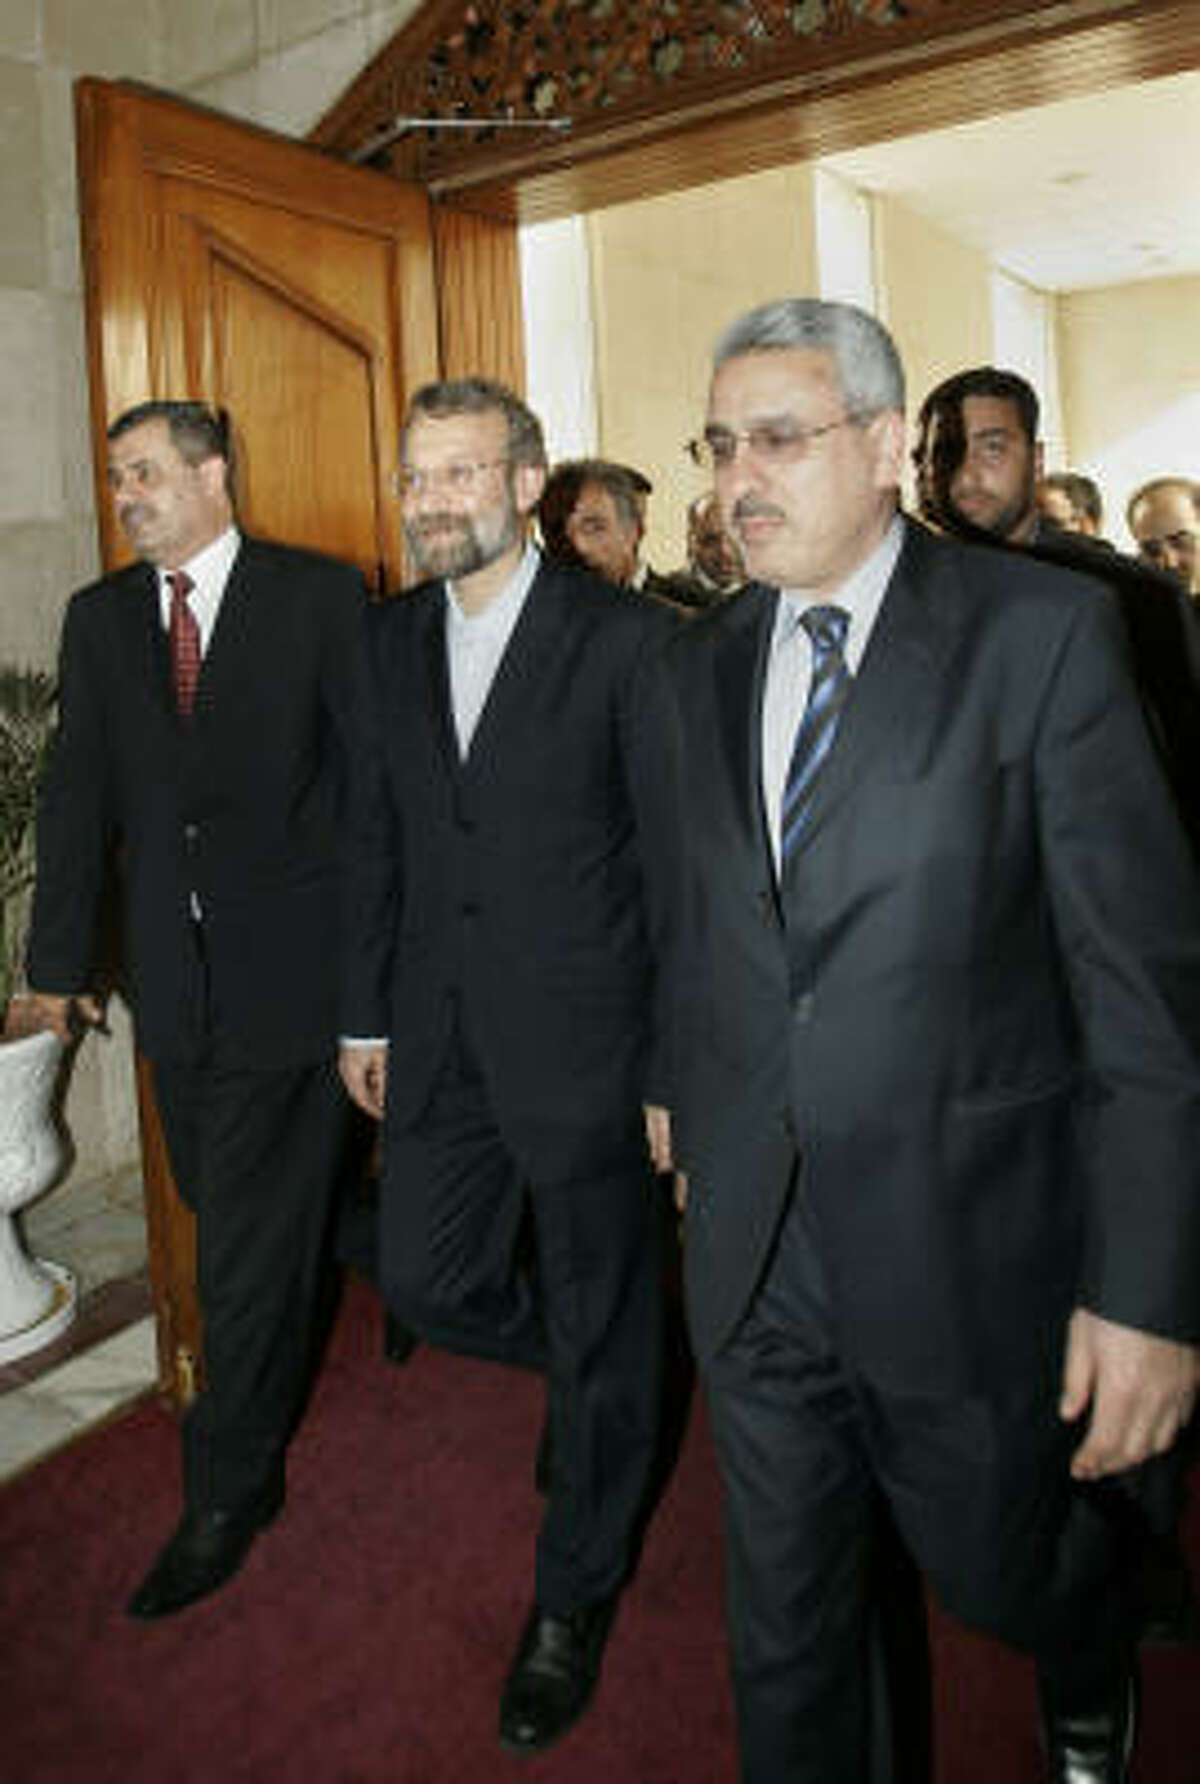 Iran's top national security official Ali Larijani, center, arrives for meeting with Iraqi Prime Minister Nouri al-Maliki in Baghdad today.